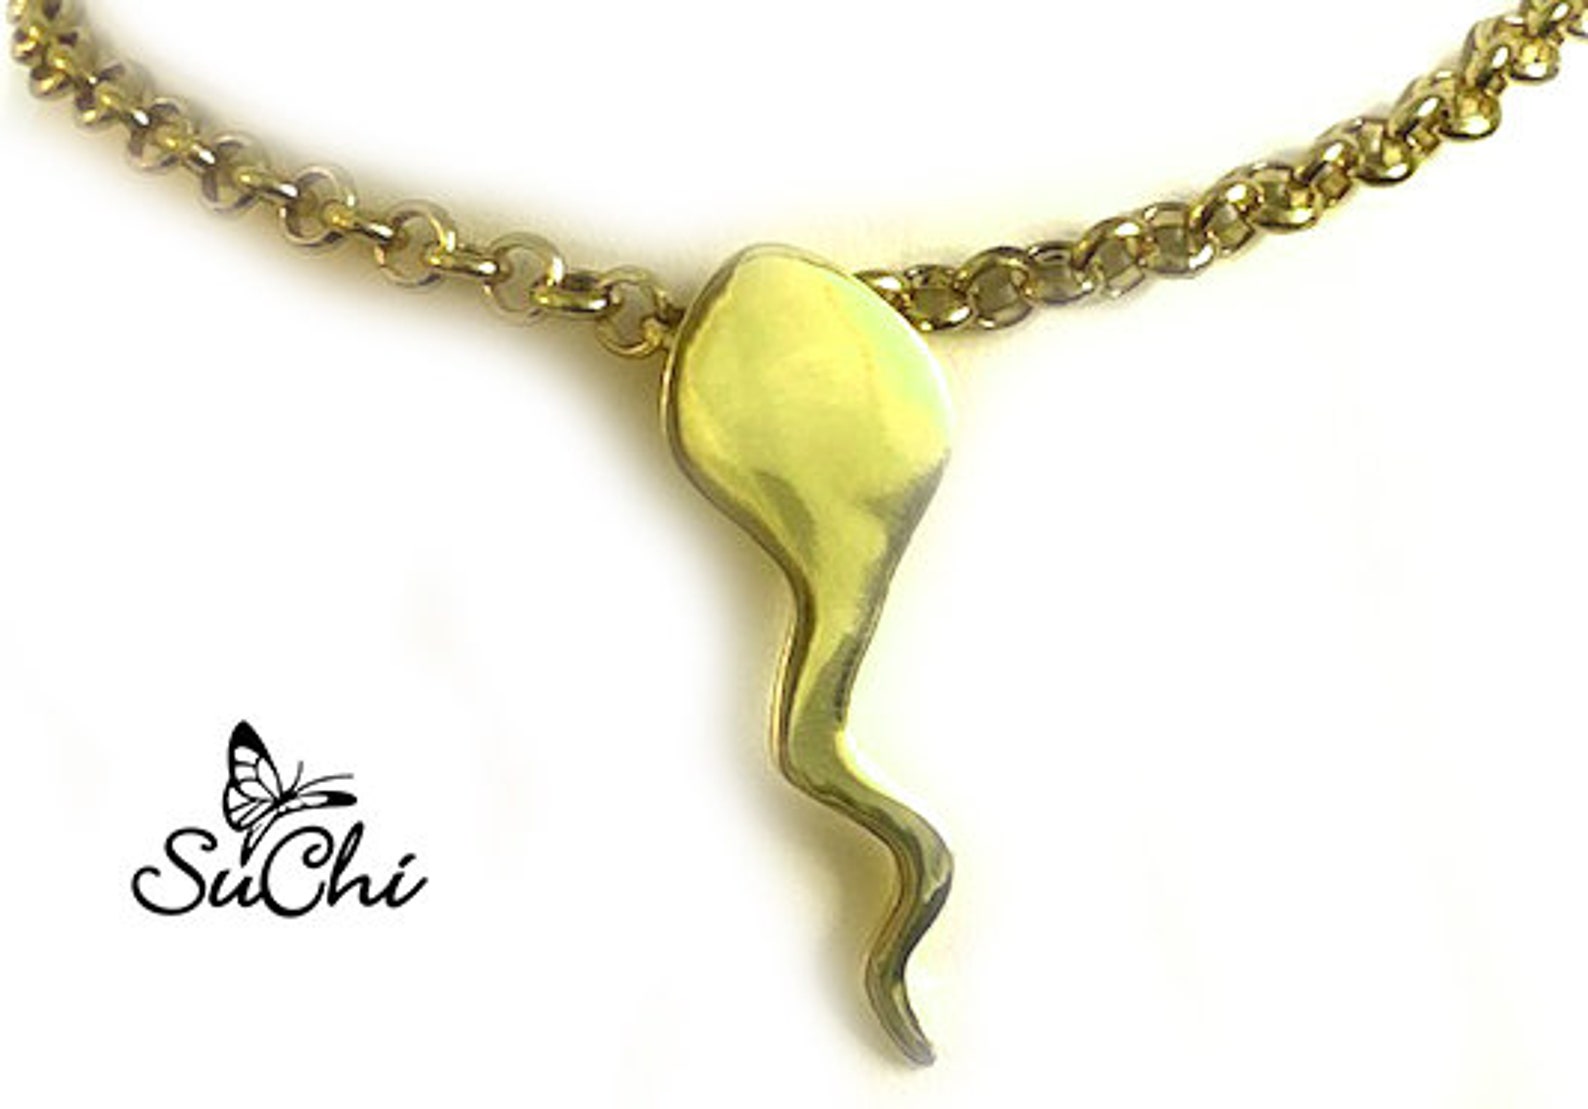 Necklace With a Sperm Pendant in a Silver or Golden Tone - Etsy